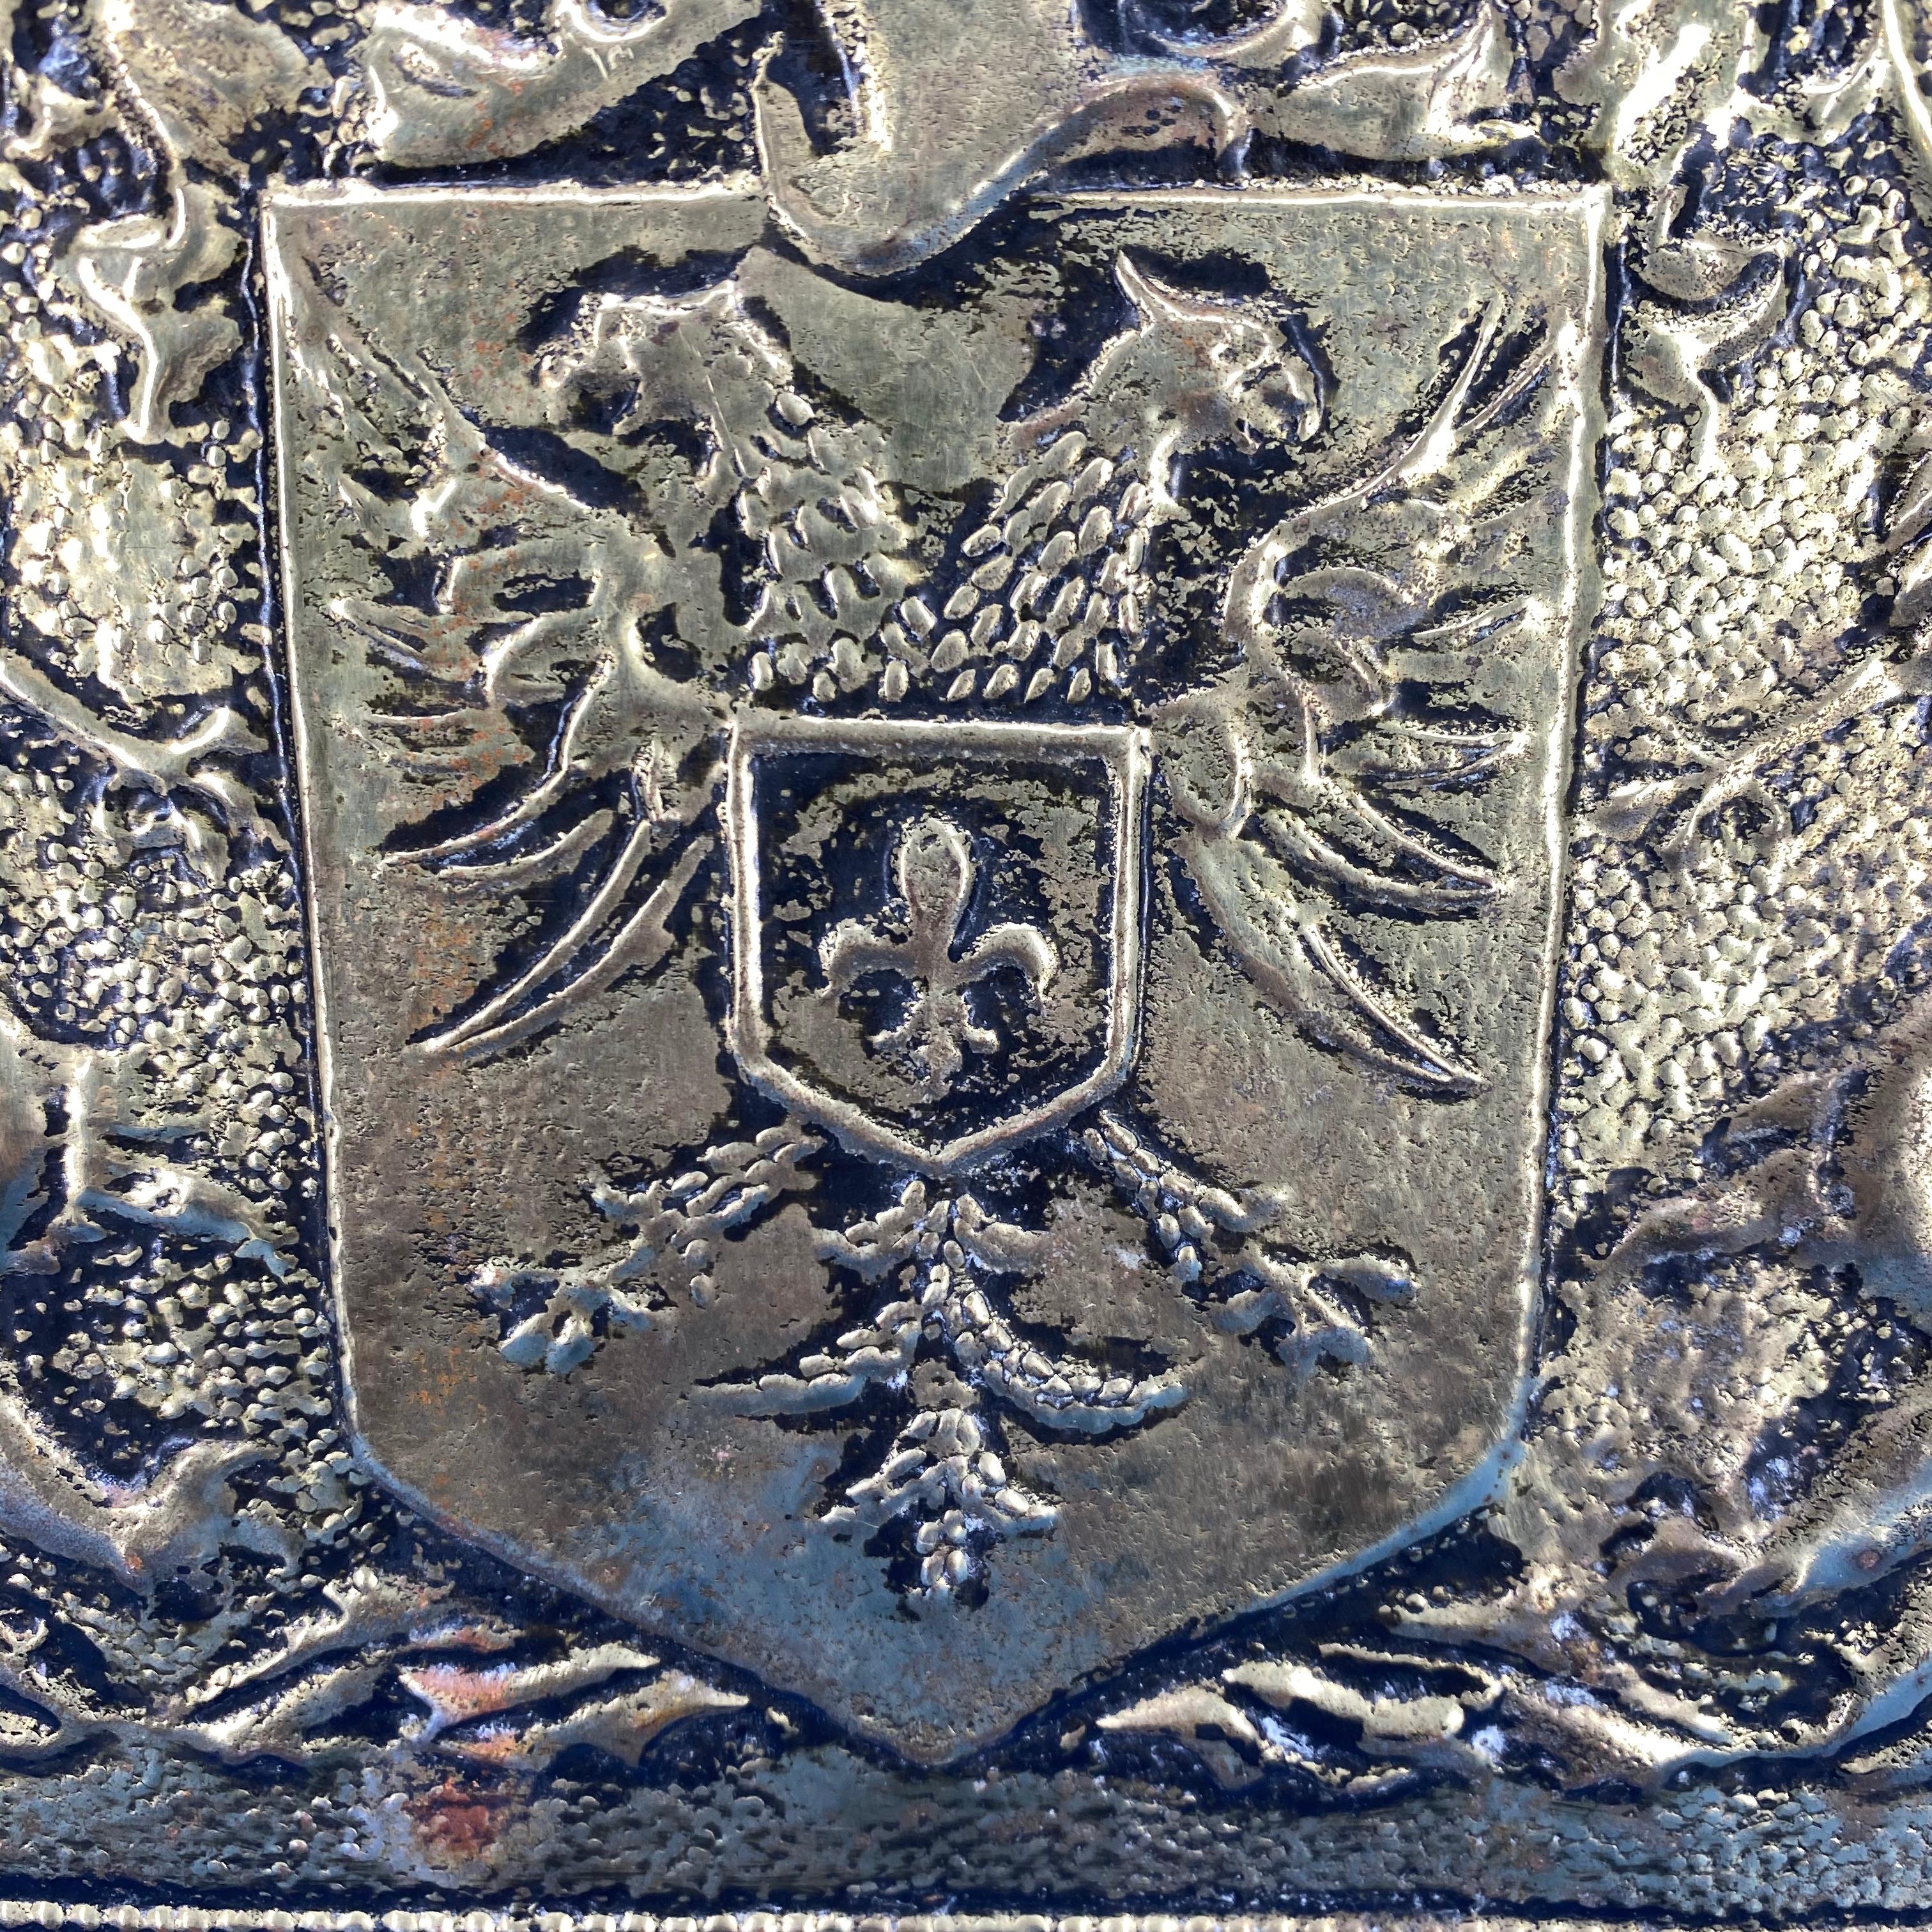 Early Victorian Style Brass Magazine Rack With Code Of Arms, Griffins And Eagles 4